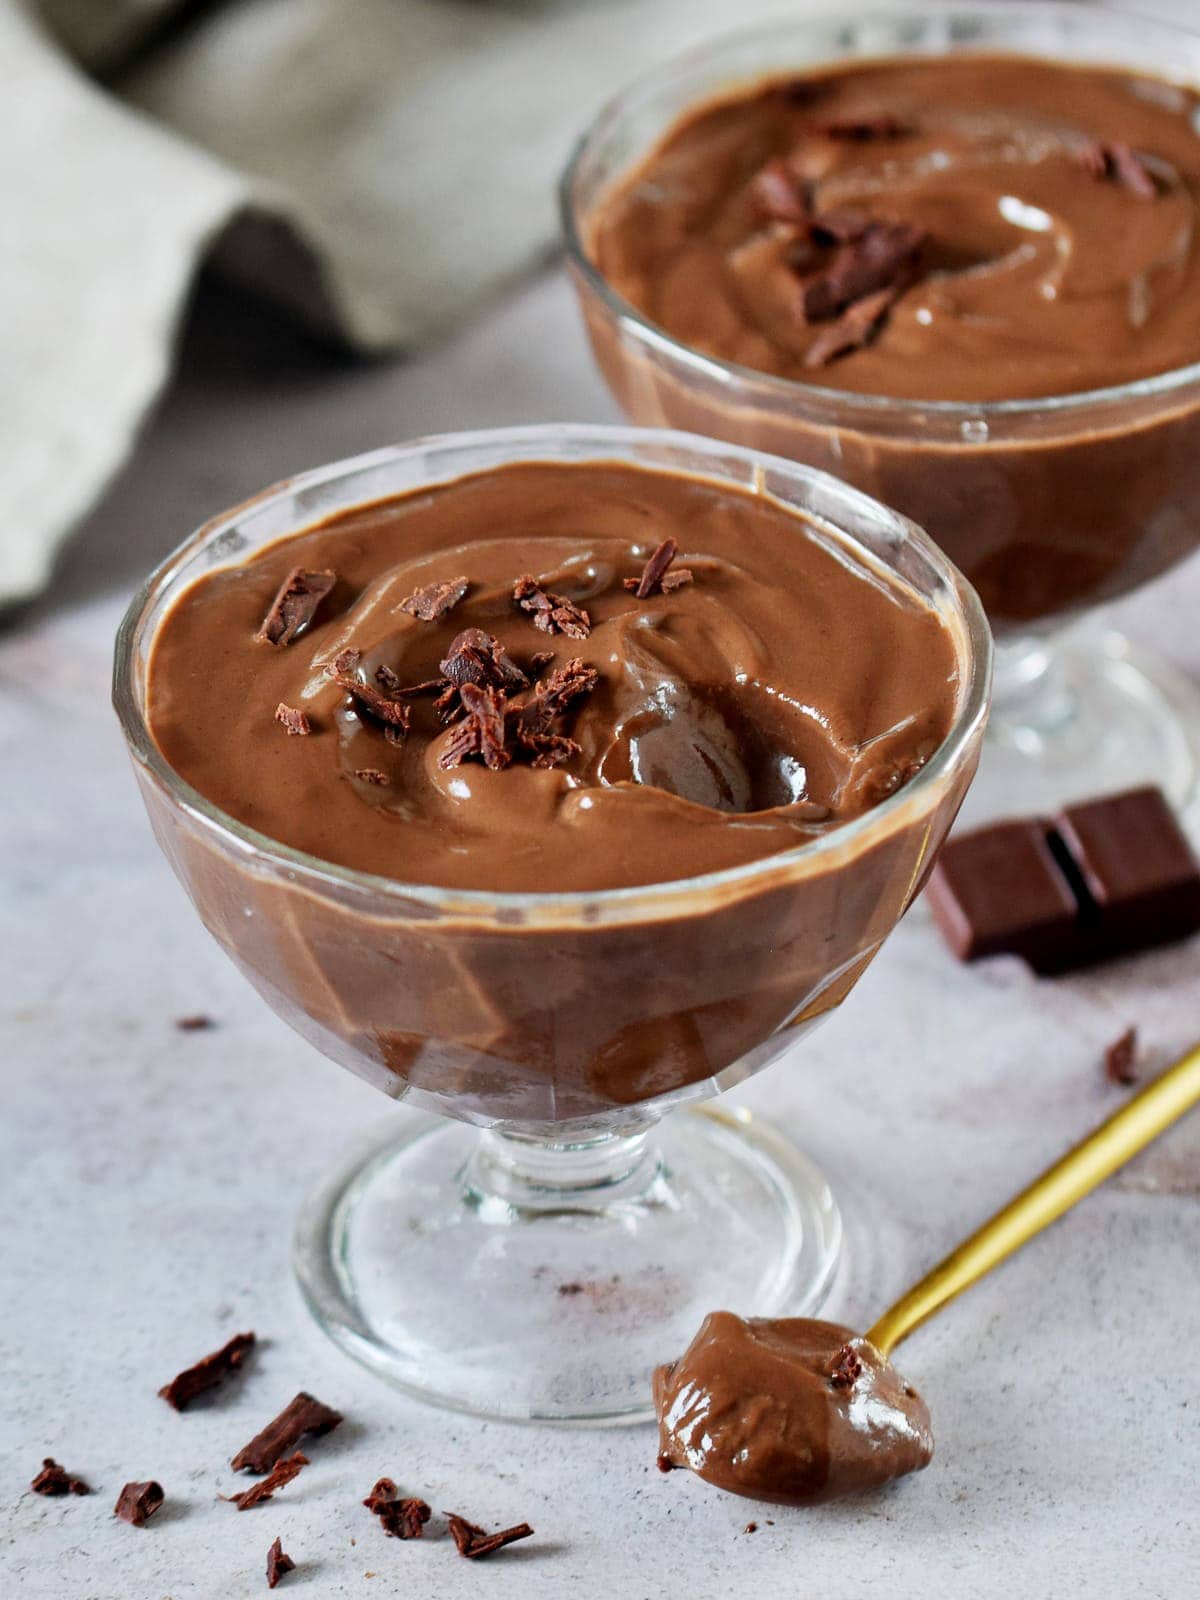 choc cream in 2 jars with spoon